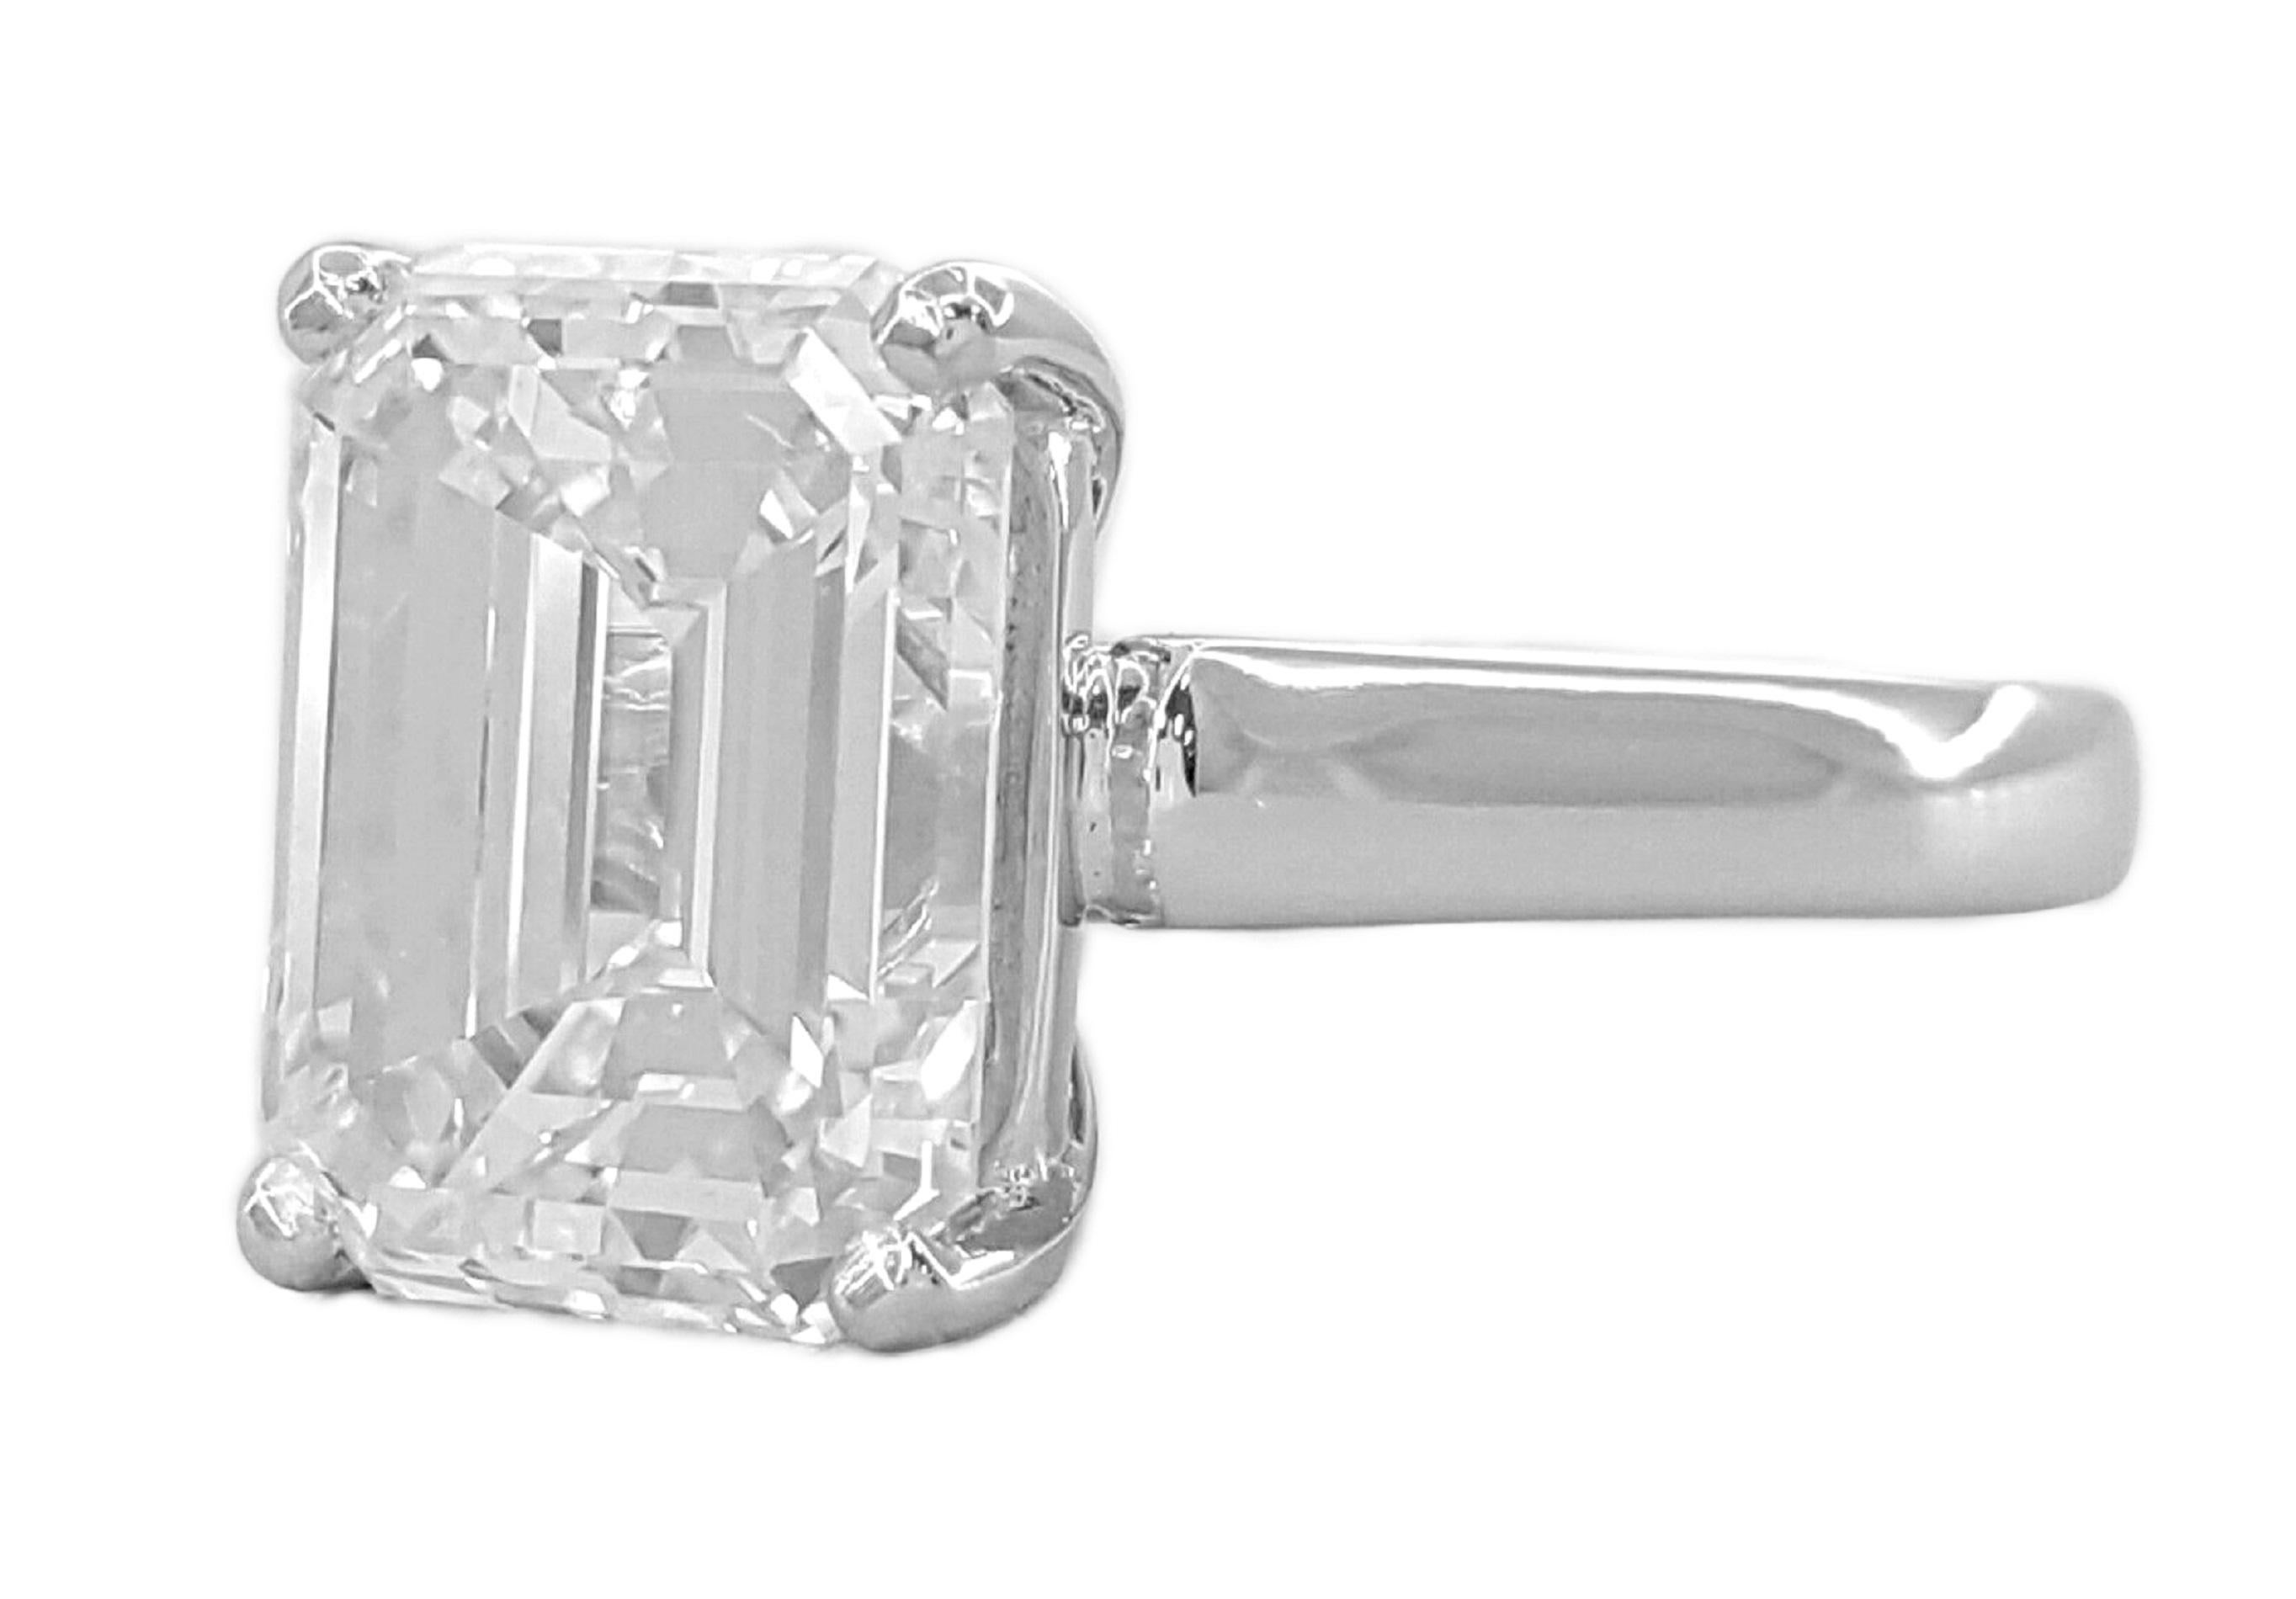  5.03 ct total weight Platinum Emerald Cut Diamond Engagement Ring.

The ring weighs 10.4 grams, size 5, the center stone is a Natural Emerald Cut diamond weighing 5.03 ct, I in color, VS1 in clarity, Very Good Polish, Good Symmetry & None